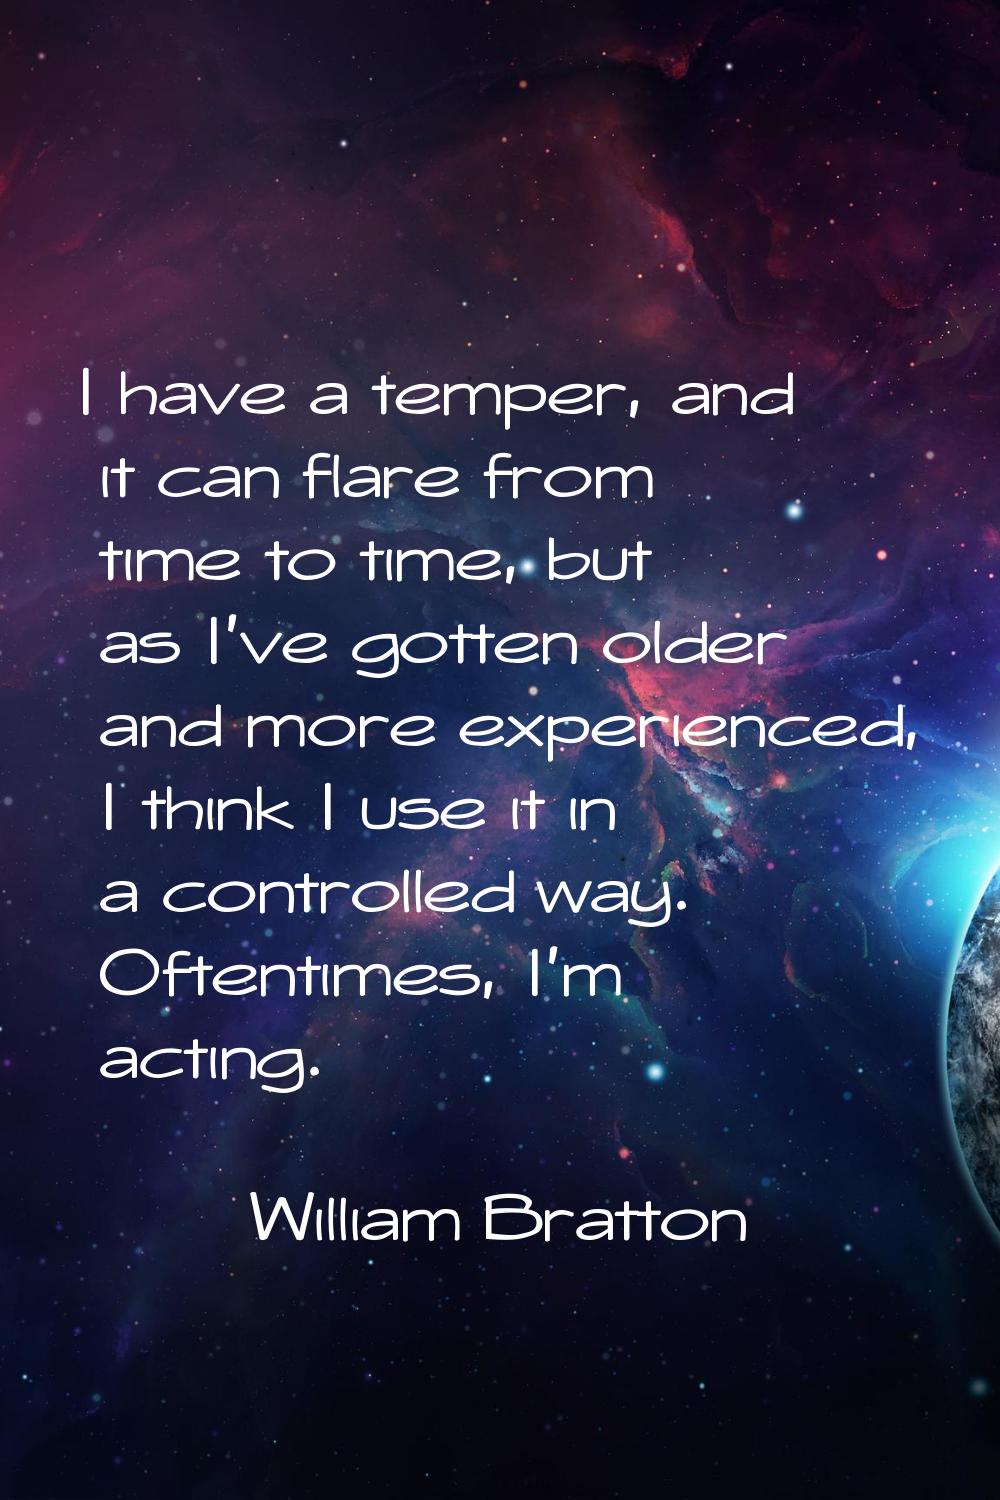 I have a temper, and it can flare from time to time, but as I've gotten older and more experienced,